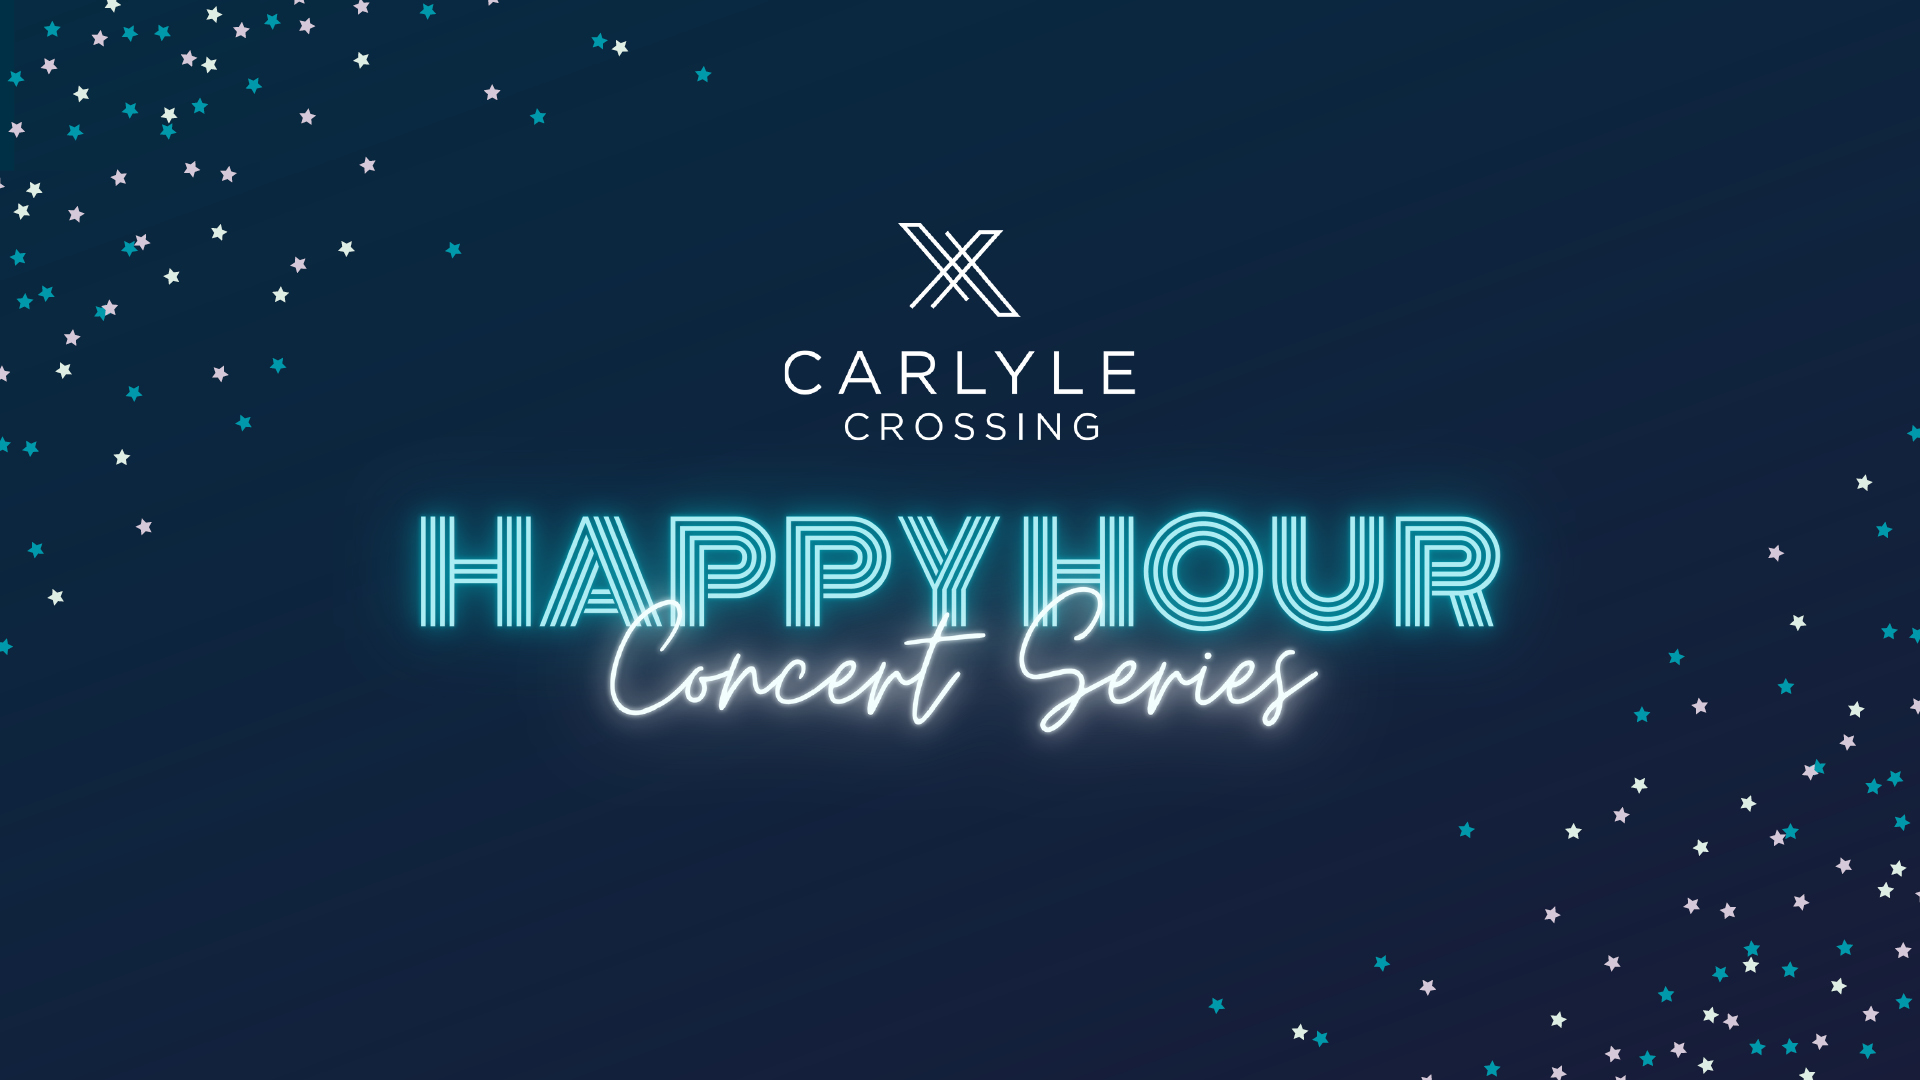 Happy Hour Concert Series at Carlyle Crossing: Justin Trawick and The Common Good